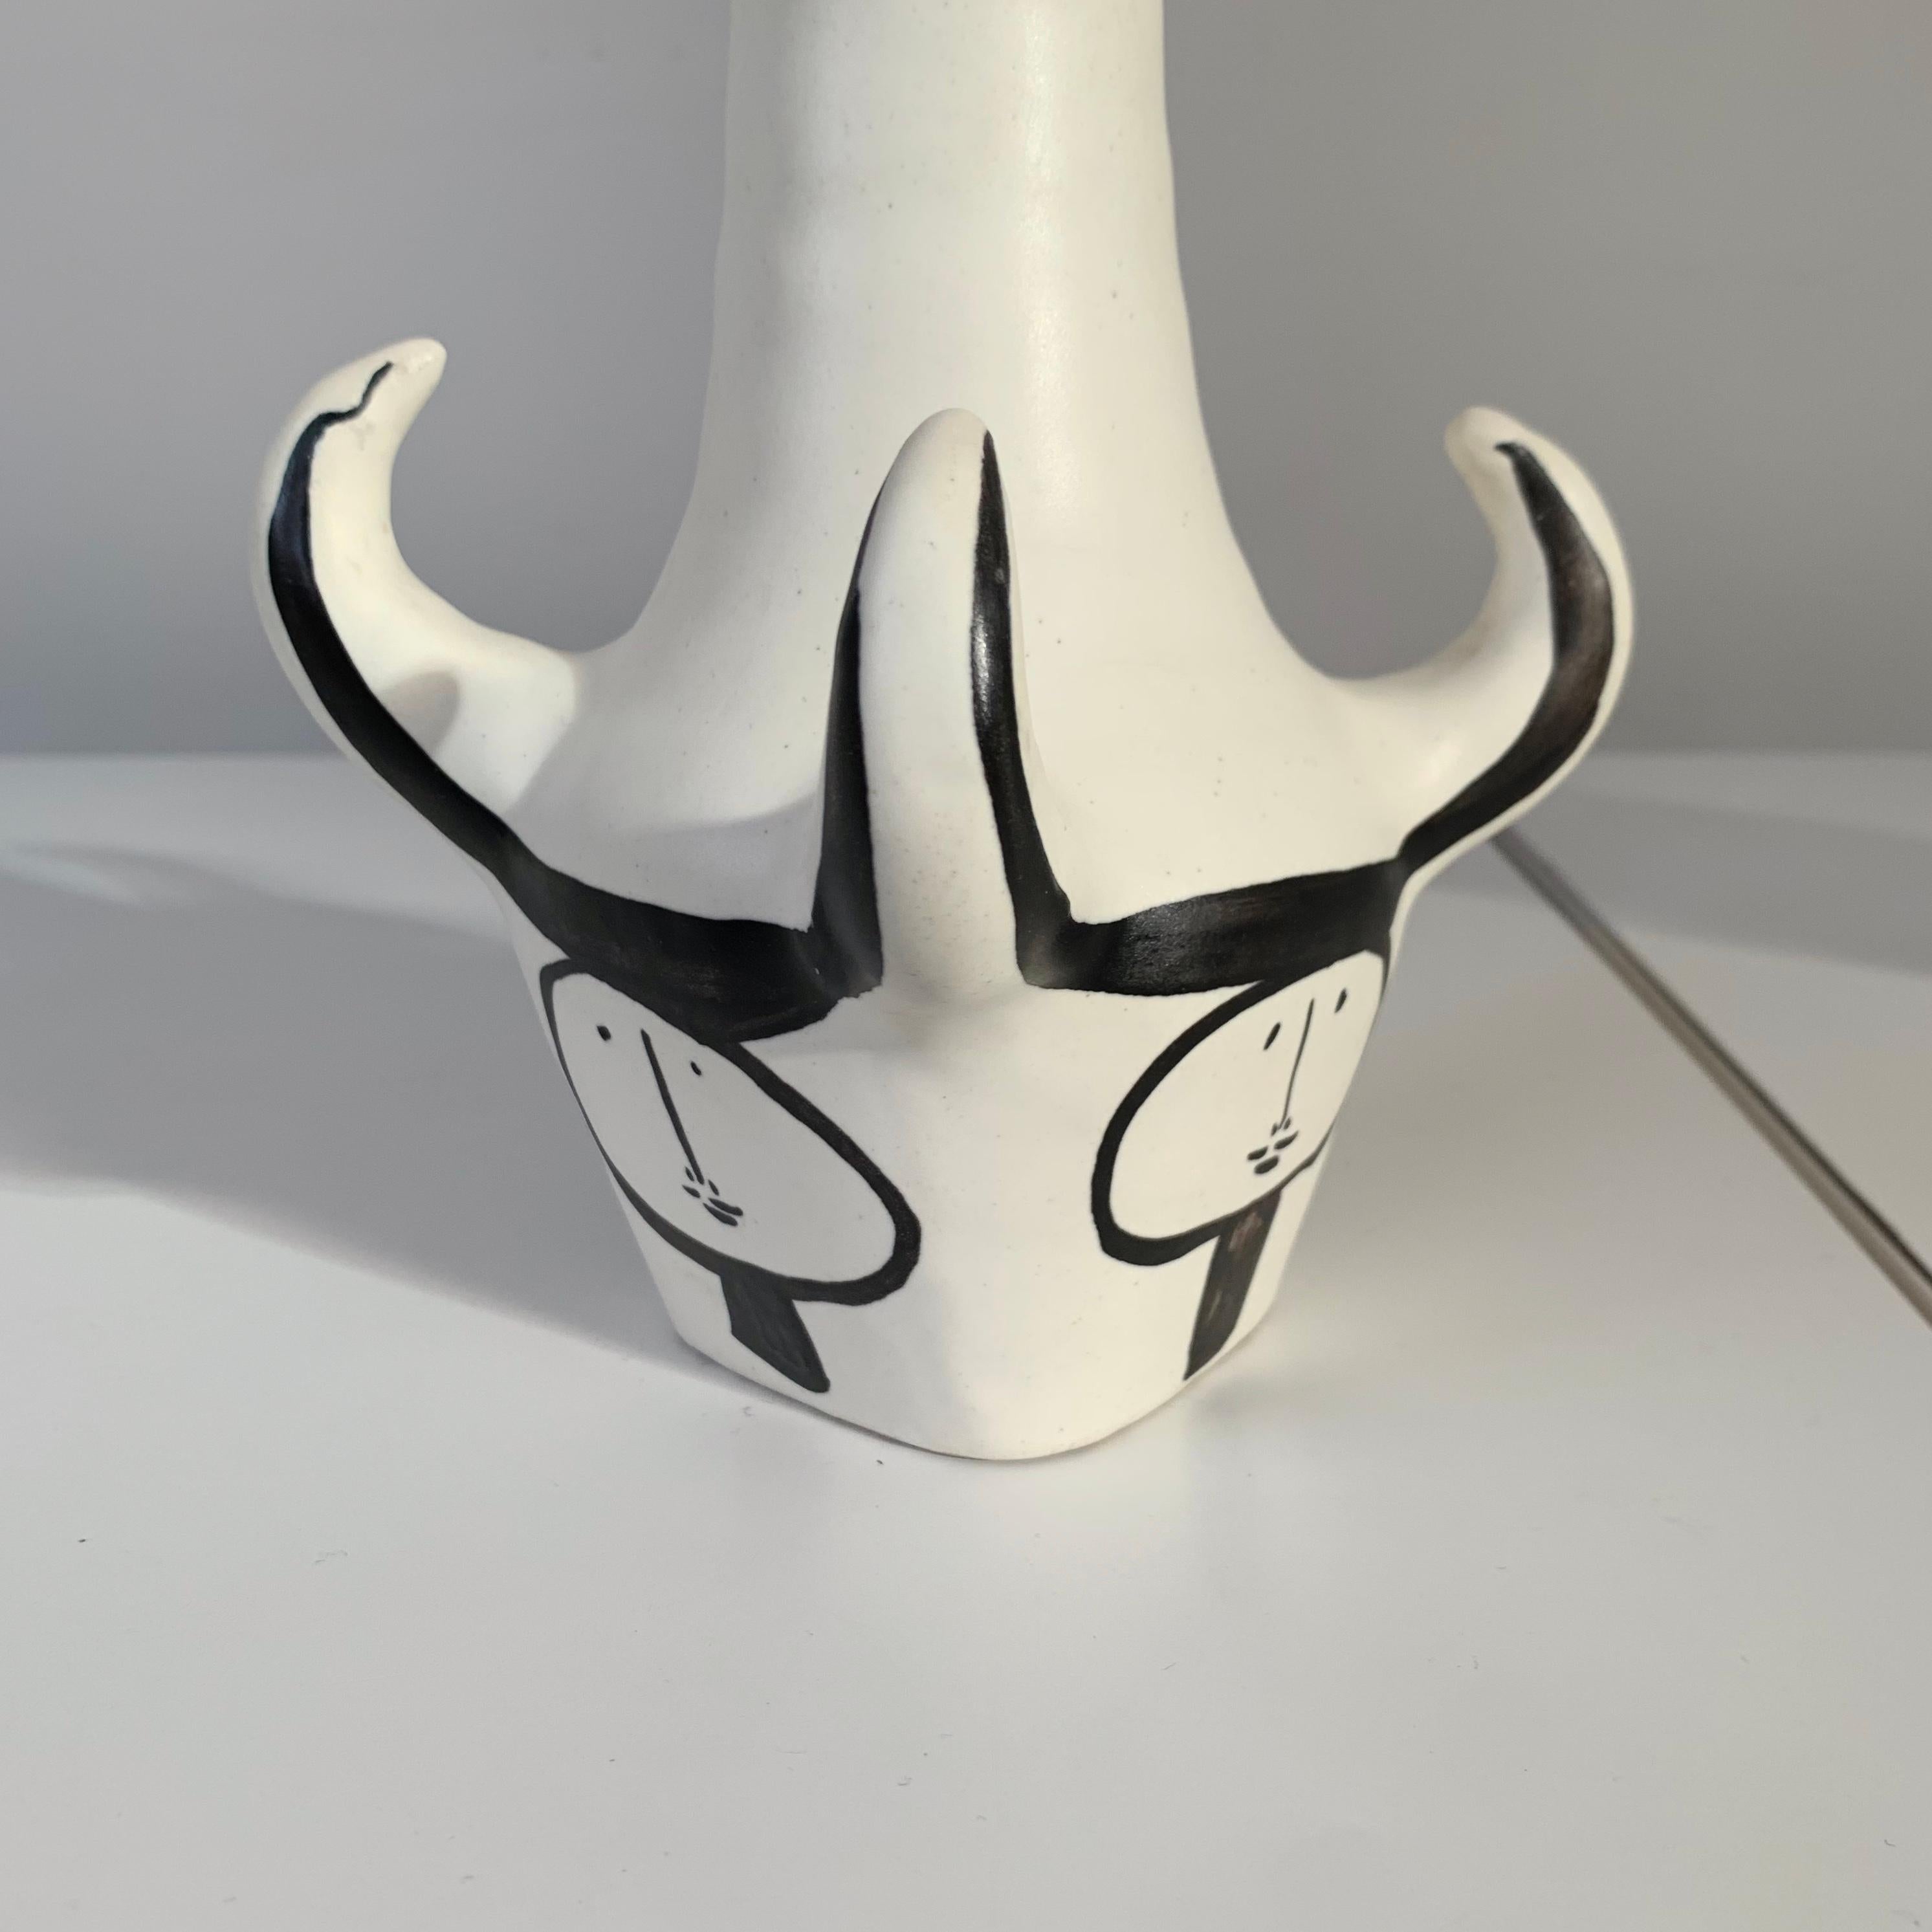  Roger Capron Pair Of 4 Horns Signed Ceramic Table Lamps , circa 1955, France. For Sale 3